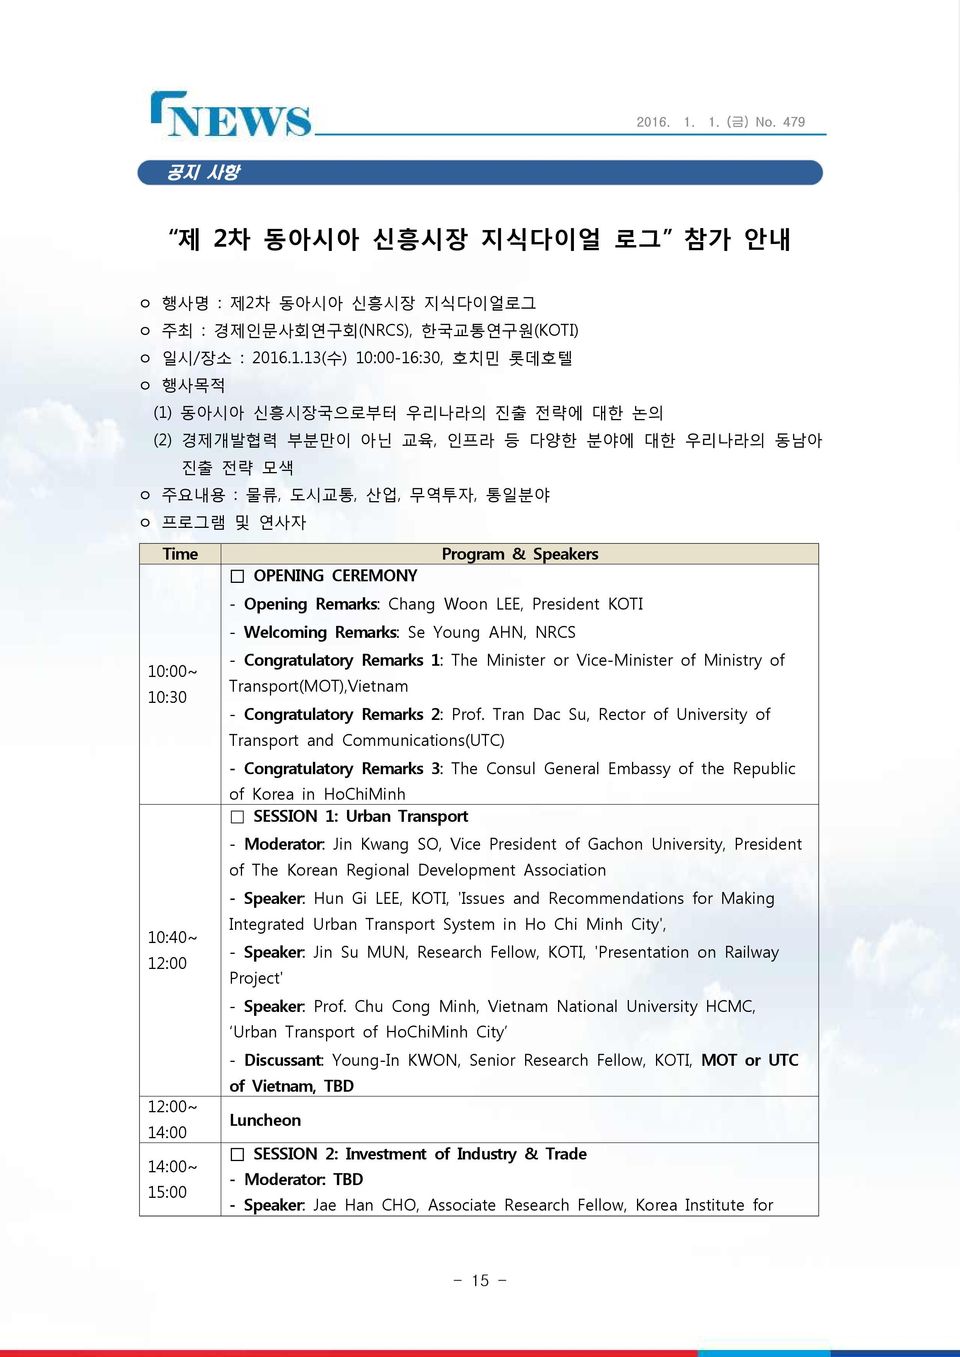 10:40~ 12:00 12:00~ 14:00 14:00~ 15:00 Program & Speakers OPENING CEREMONY - Opening Remarks: Chang Woon LEE, President KOTI - Welcoming Remarks: Se Young AHN, NRCS - Congratulatory Remarks 1: The